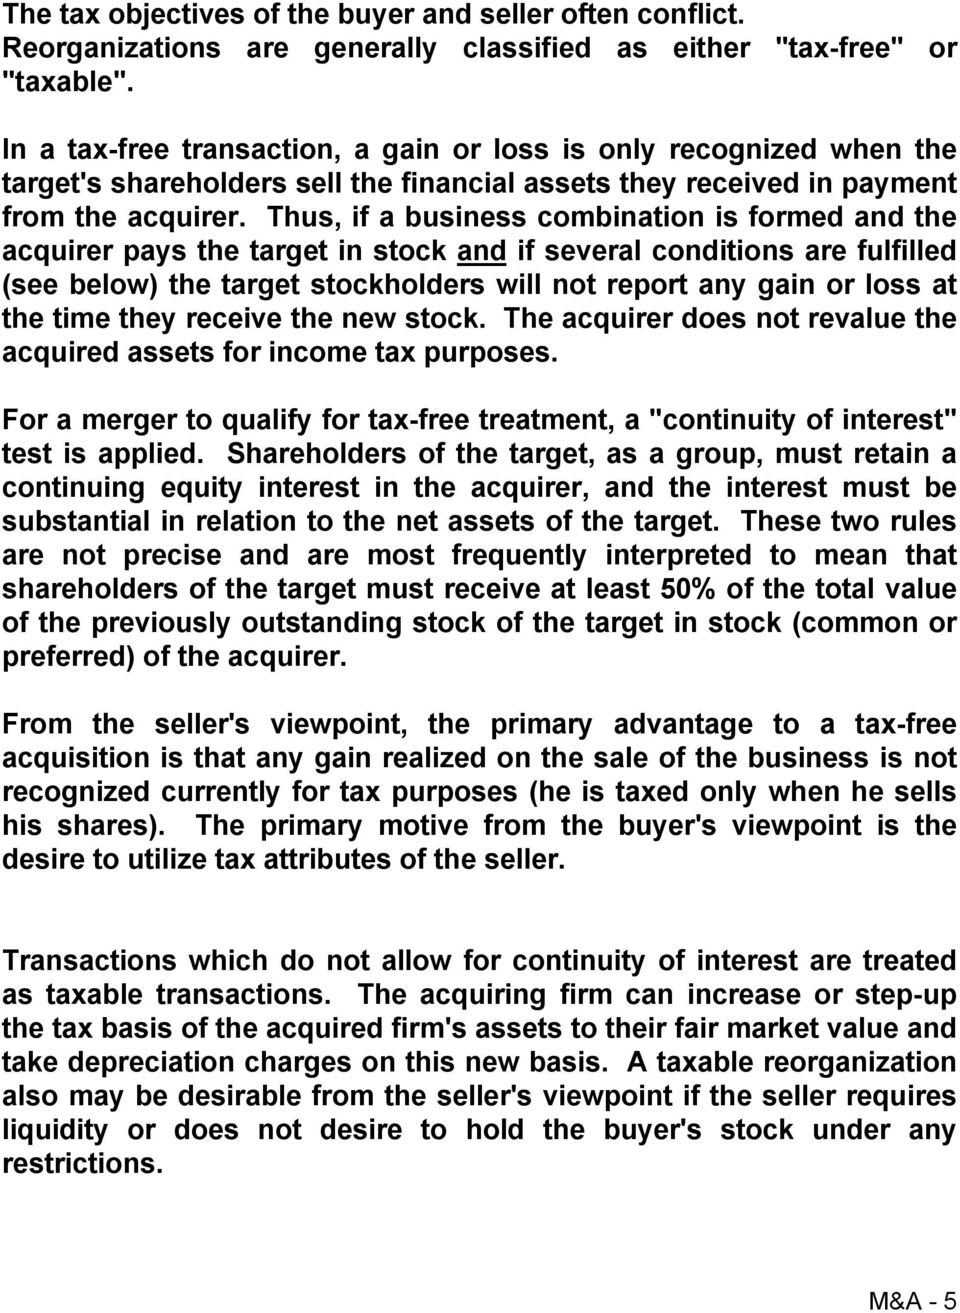 Thus, if a business combination is formed and the acquirer pays the target in stock and if several conditions are fulfilled (see below) the target stockholders will not report any gain or loss at the